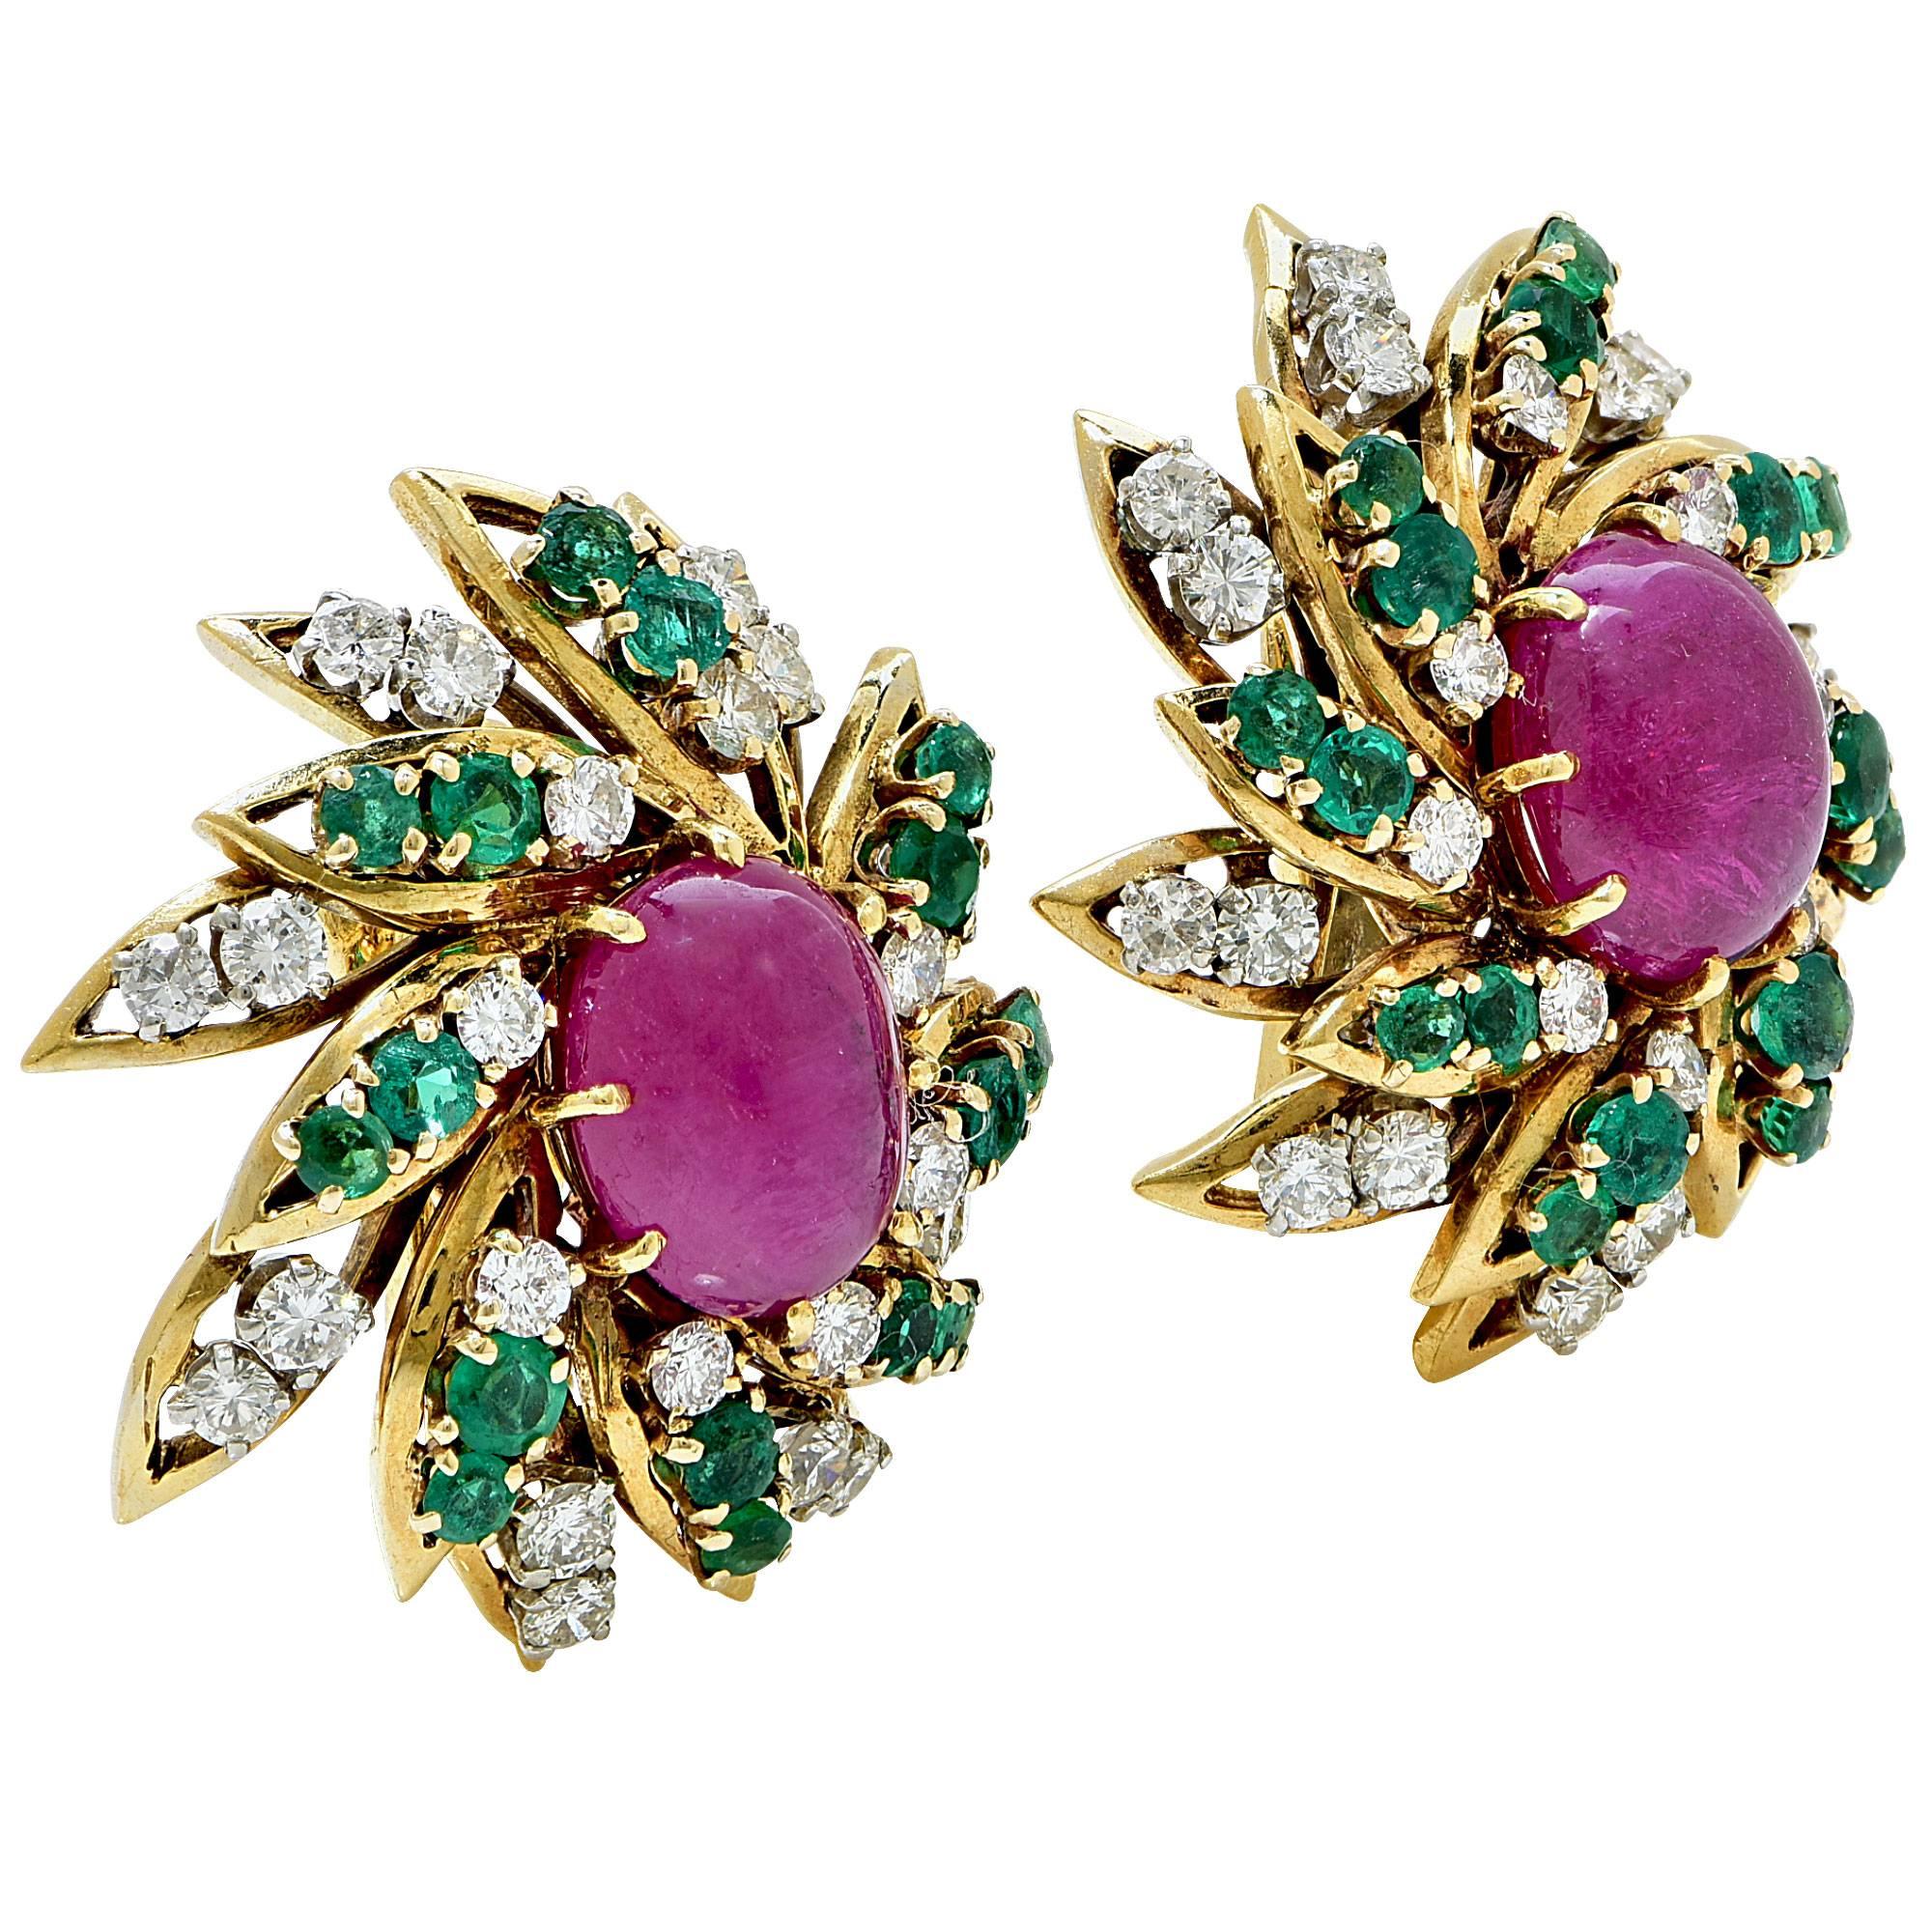 18k yellow gold Webb earrings featuring 2 cabochons Rubies weighing approximately 12cts total, accented by 1.4cts of round cut Emeralds and 48 round brilliant cut diamonds weighing approximately 3cts total, G color VS clarity.

These earrings